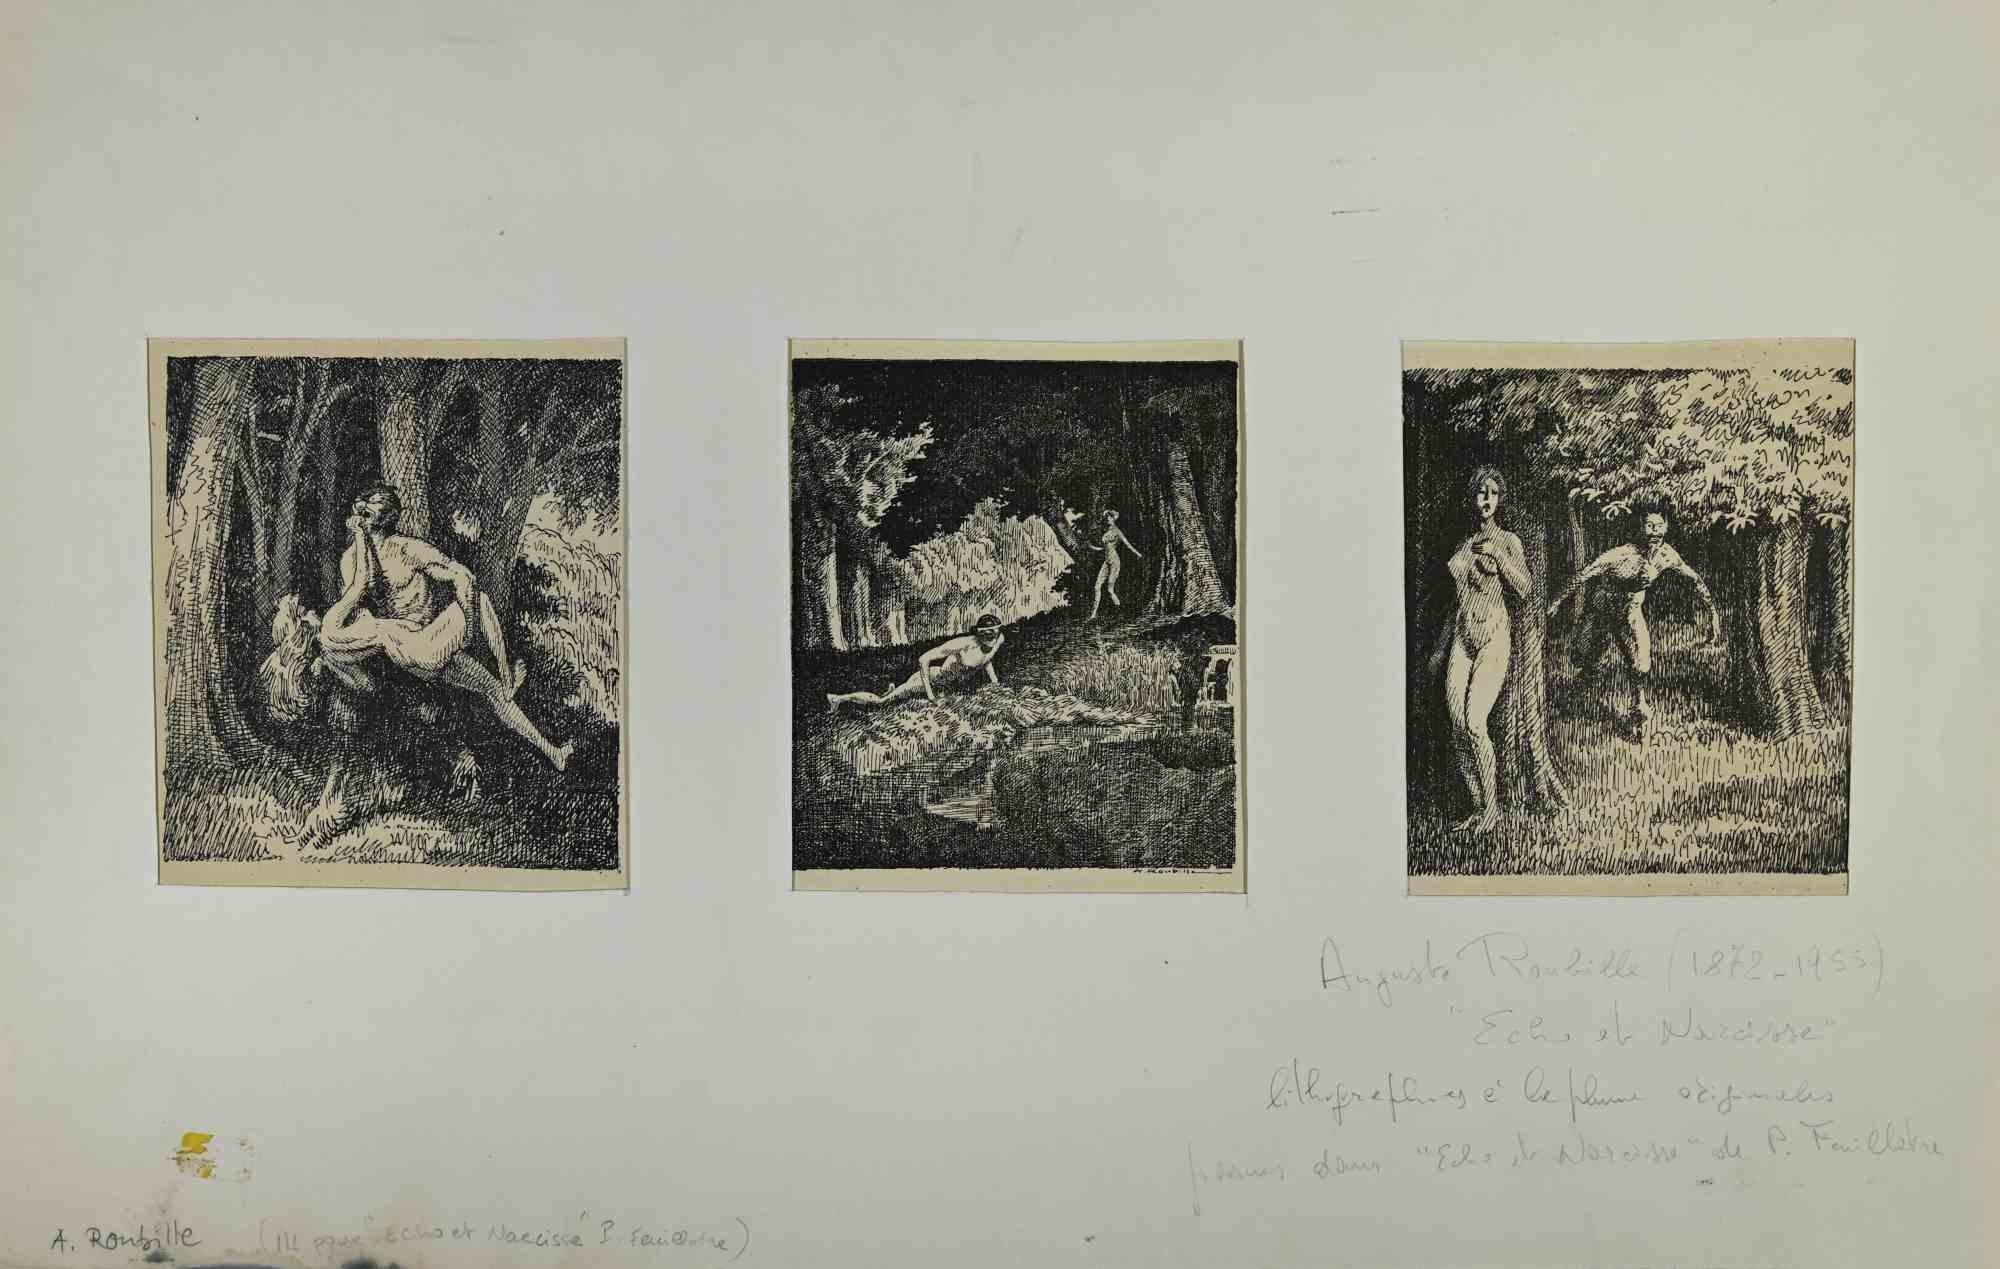 ‎Echo et Narcisse is an artwok realized in 1911, by the French Artist Auguste Roubille (1872-1955).

Three Lithographs print on paper, cm 20x15 cad. Signed in plate. The artwork is part of the Poem of Paul Feuillâtre.

The work is glued on